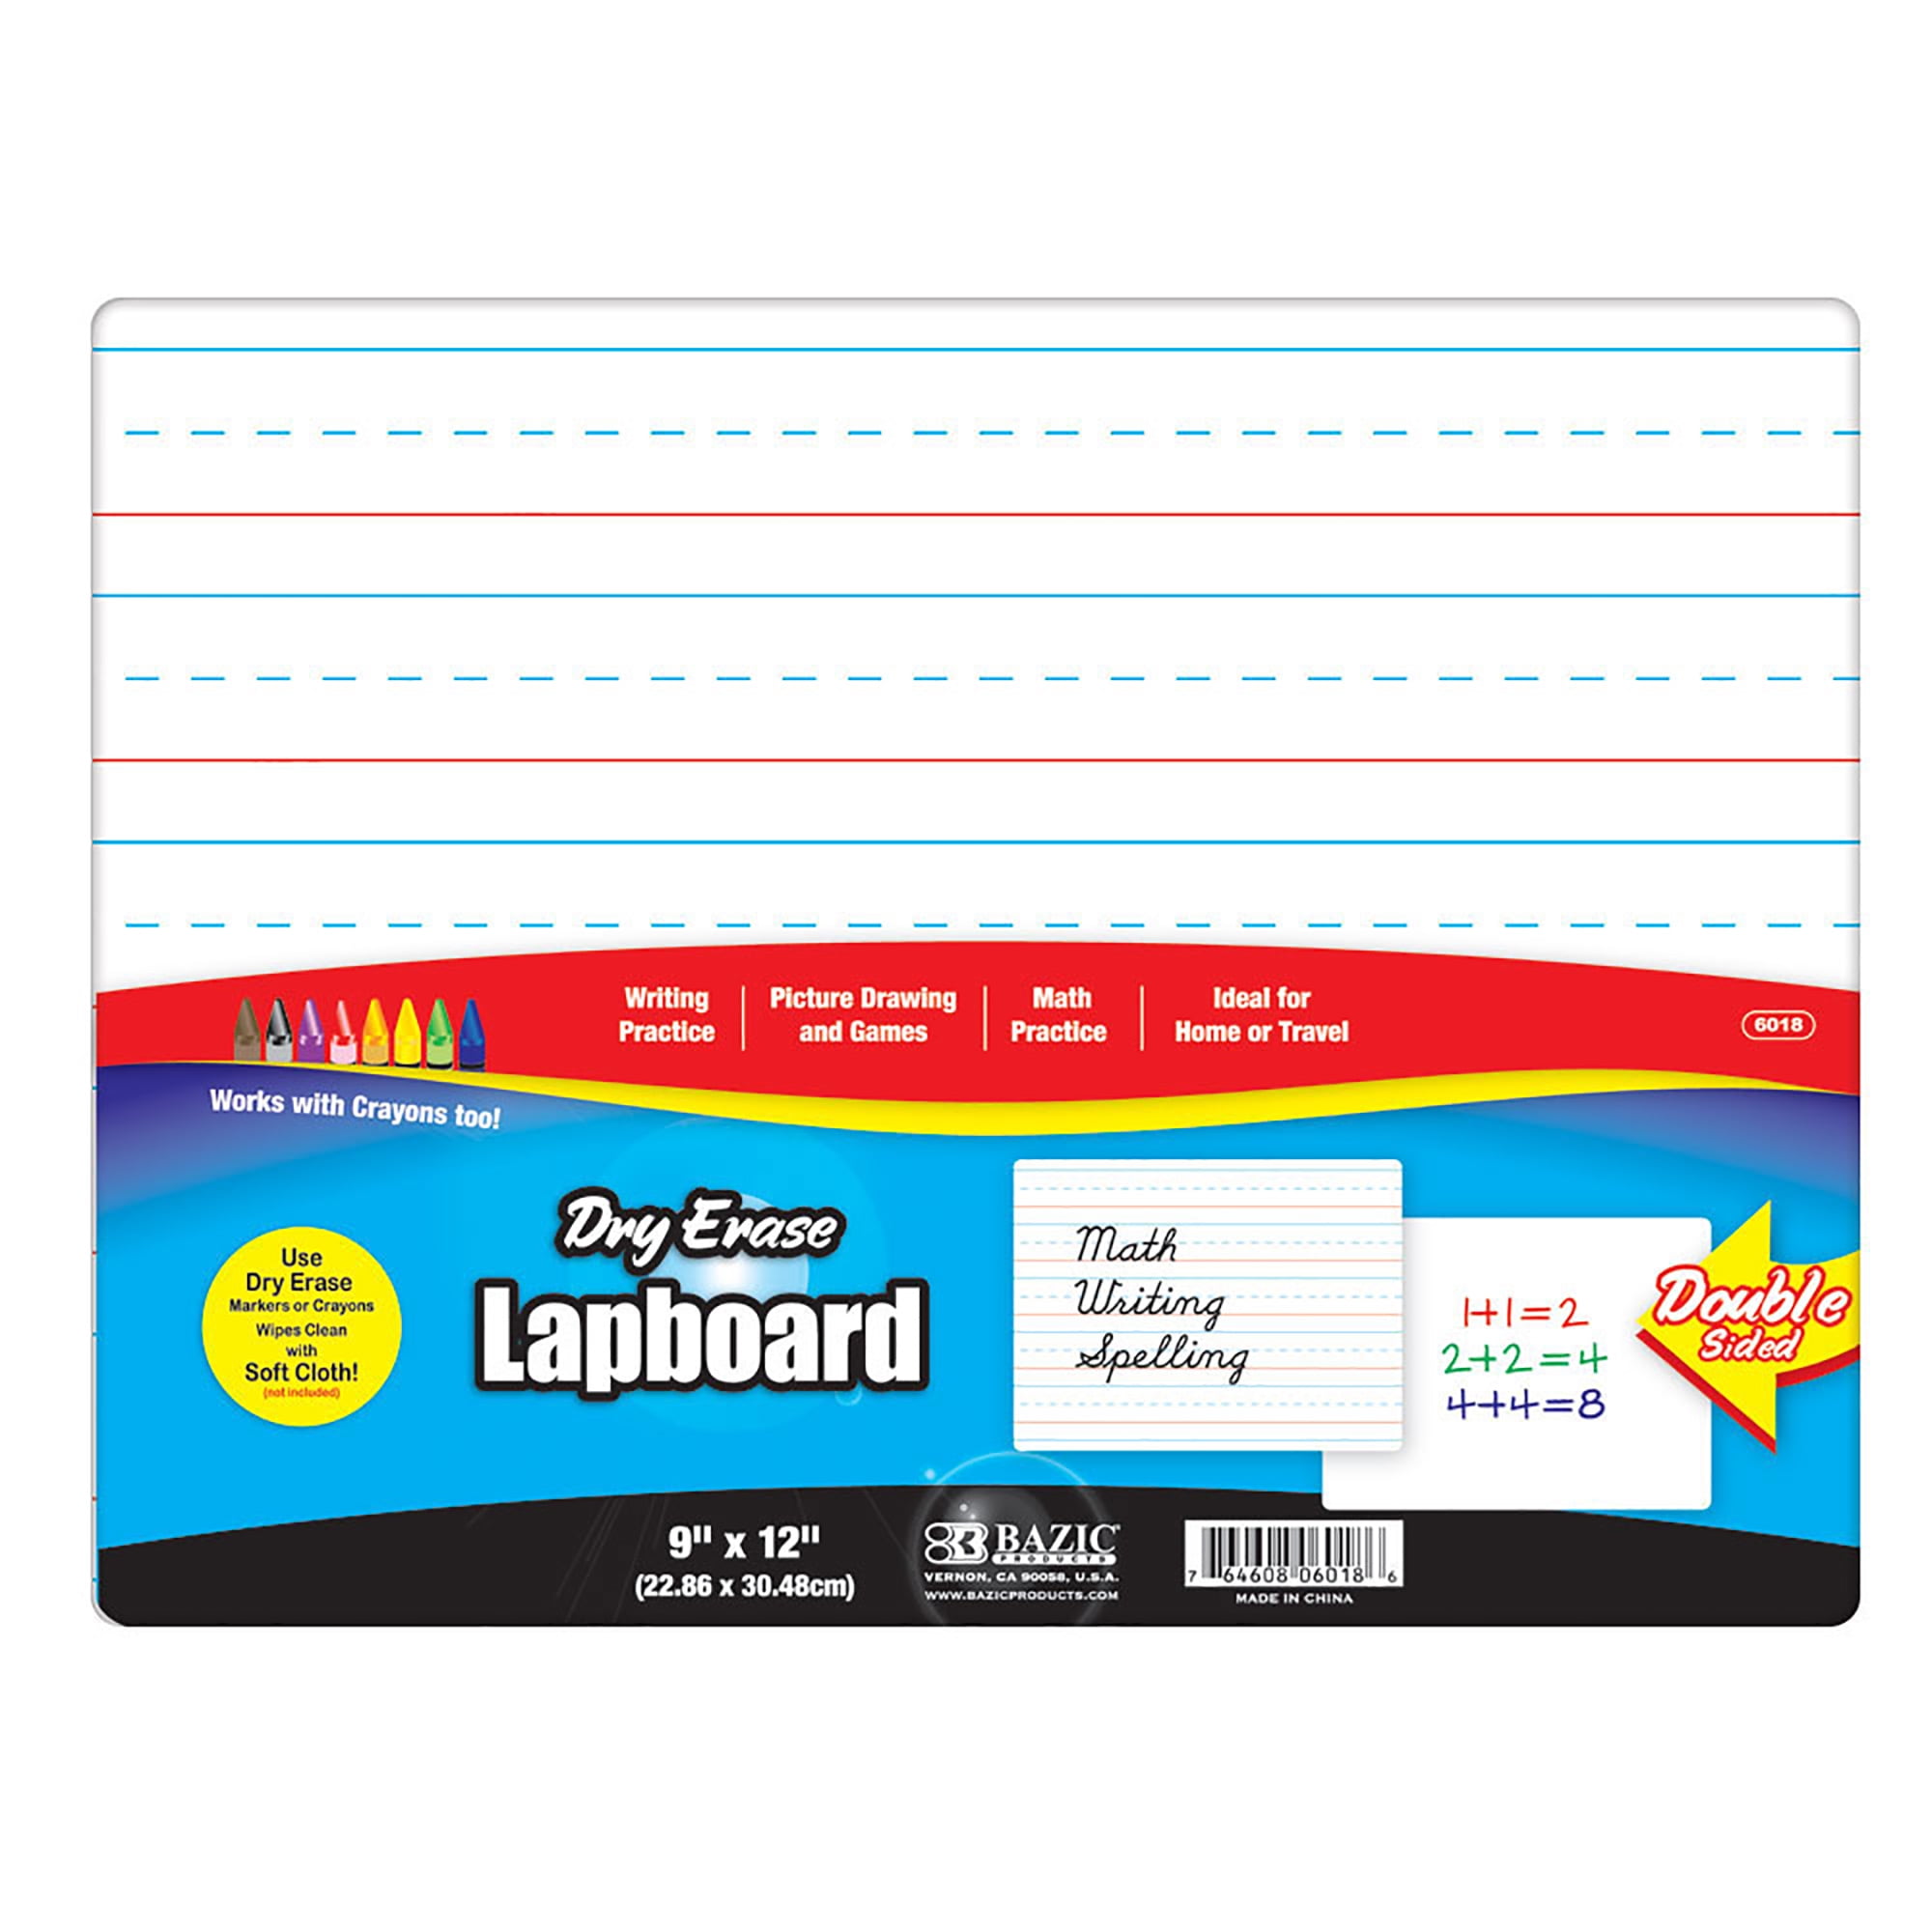 BLANK UNLINED MAGNETIC DOUBLE SIDED DRY ERASE - 9 x 12 Student